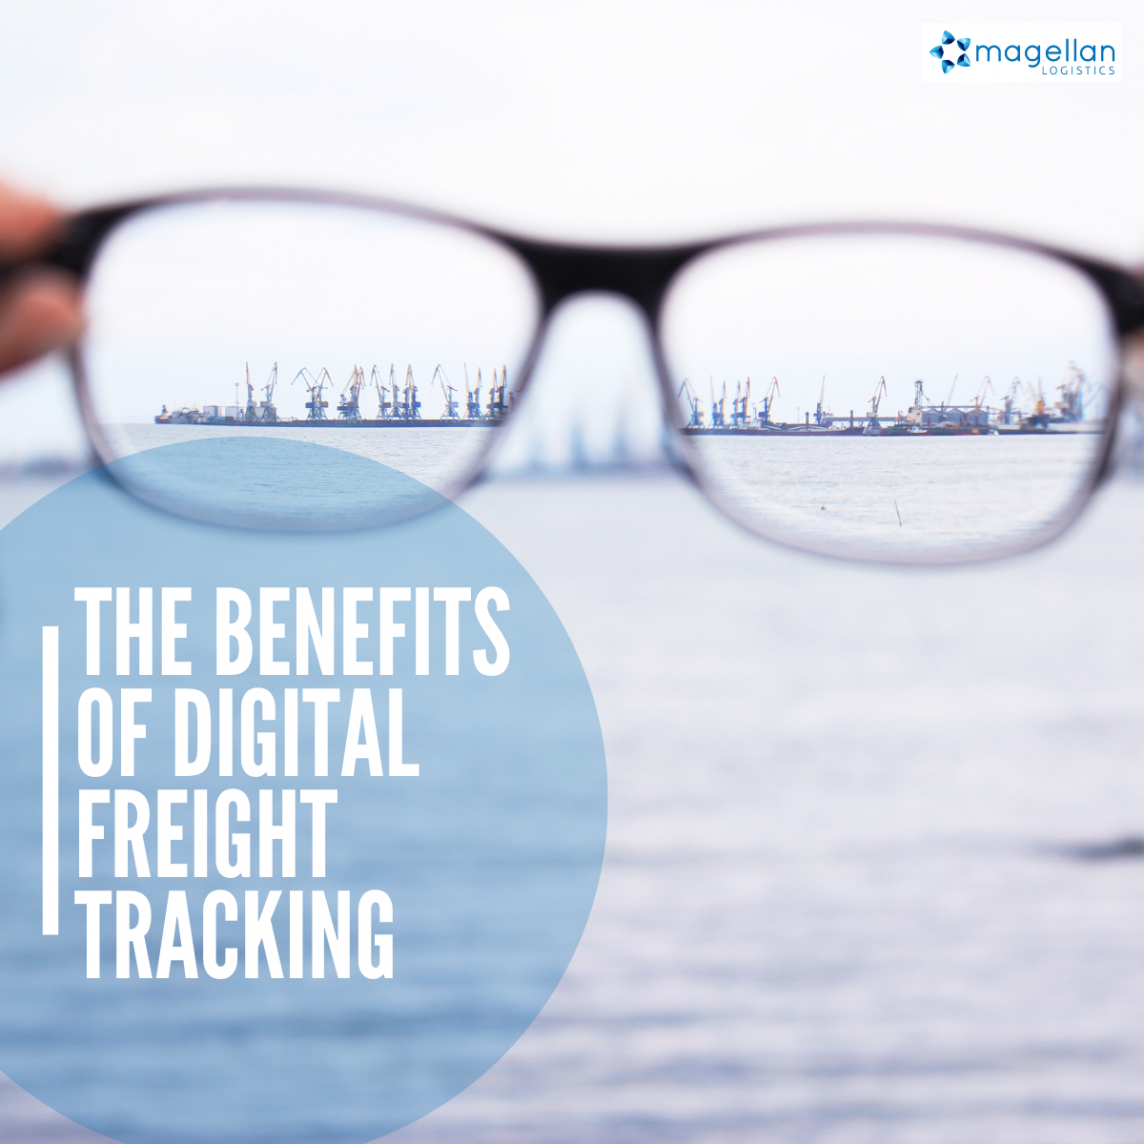 Digital Freight Tracking